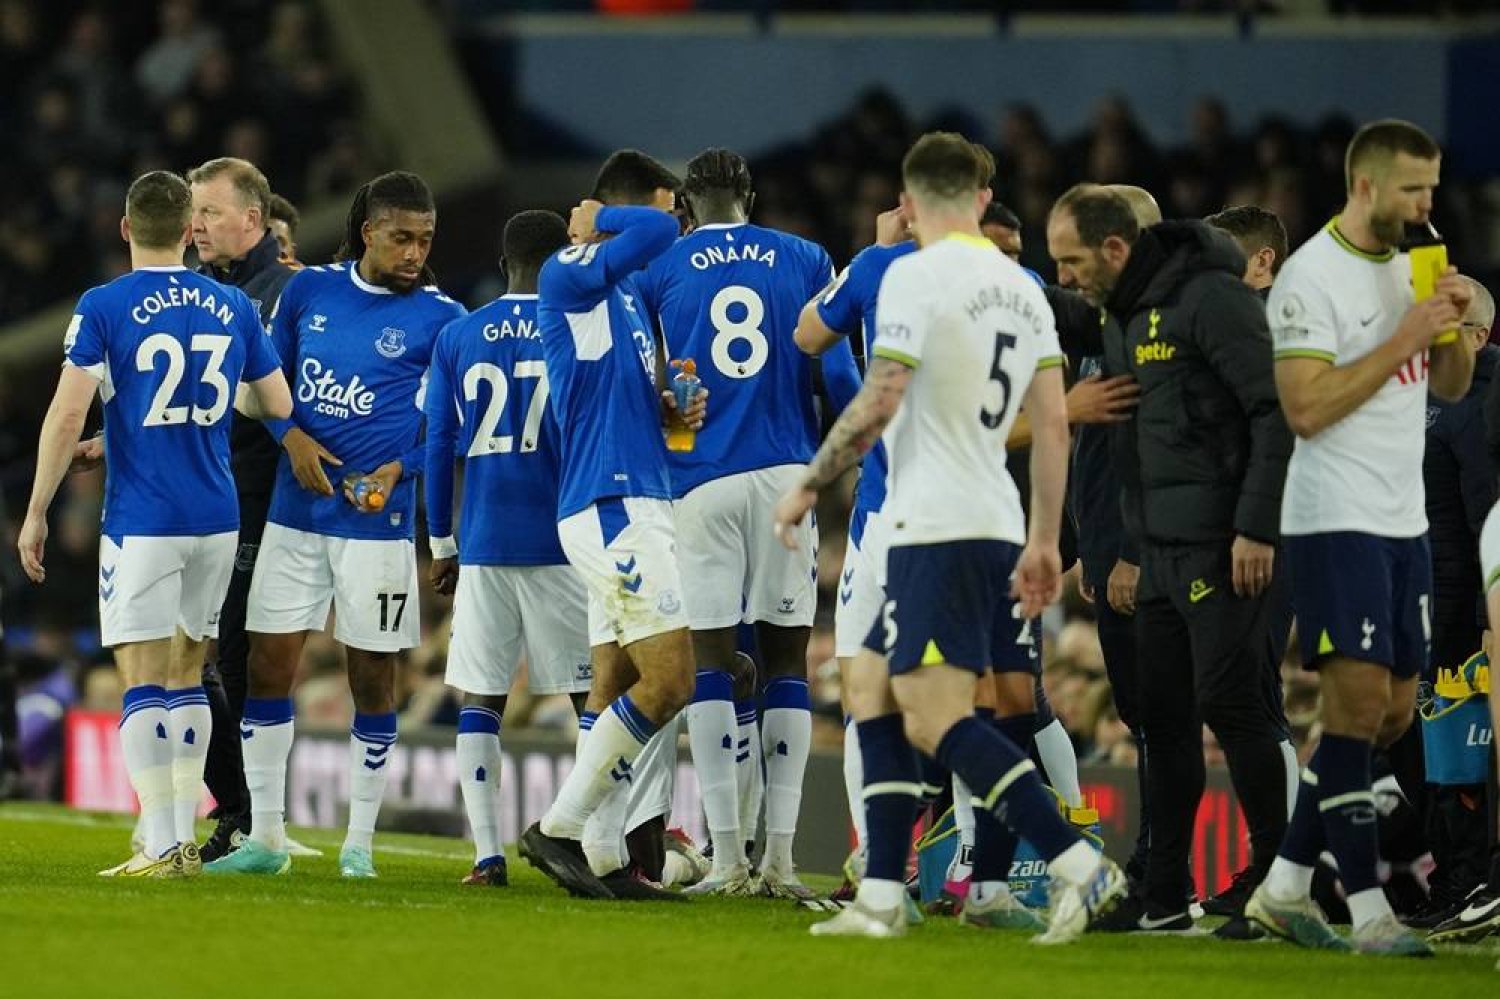 The match is paused so Muslim players can break their fast due to Ramadan during the English Premier League soccer match between Everton and Tottenham Hotspur at the Goodison Park stadium in Liverpool, England, on April 3, 2023. (AP)